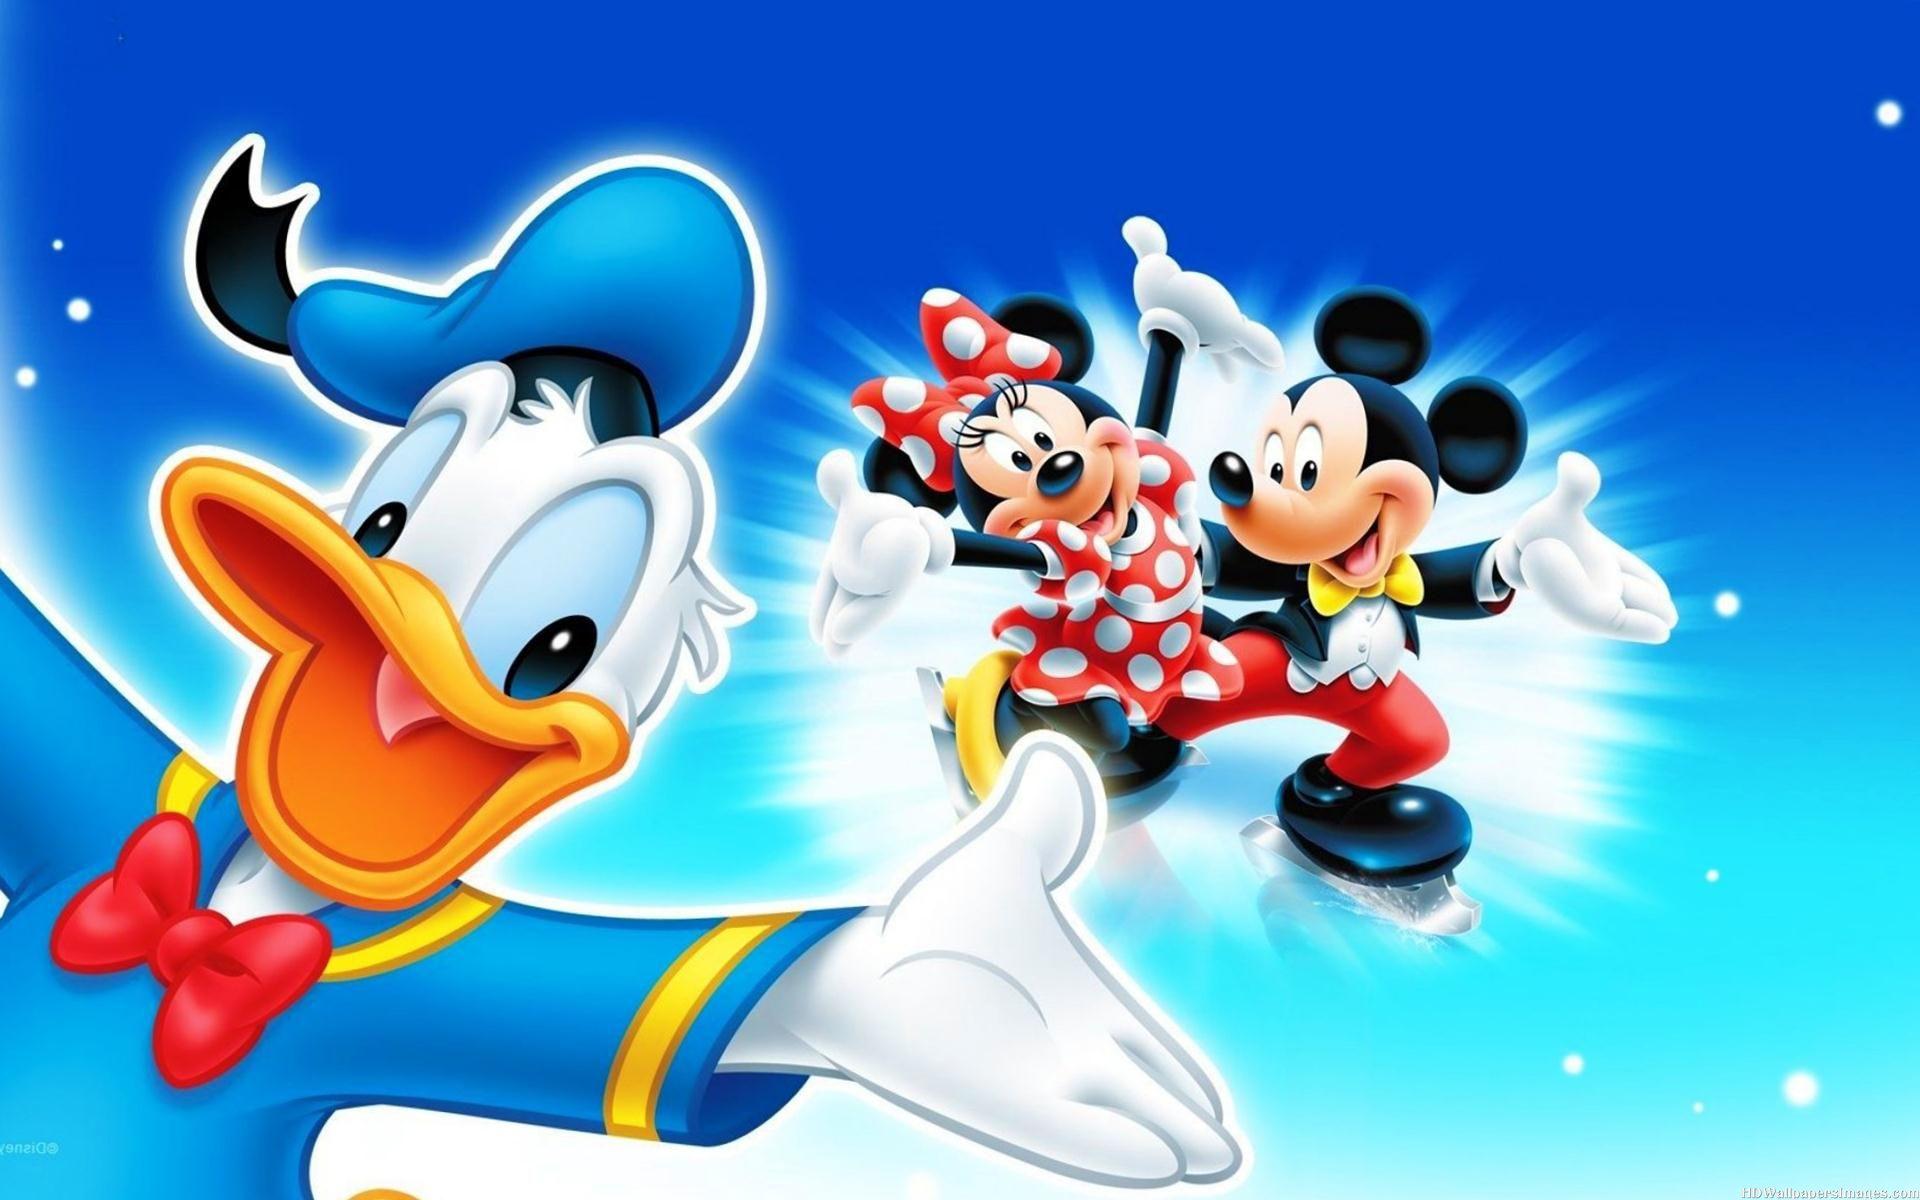 Collection of Donald Duck Wallpaper on Spyder Wallpaper 1920x1200